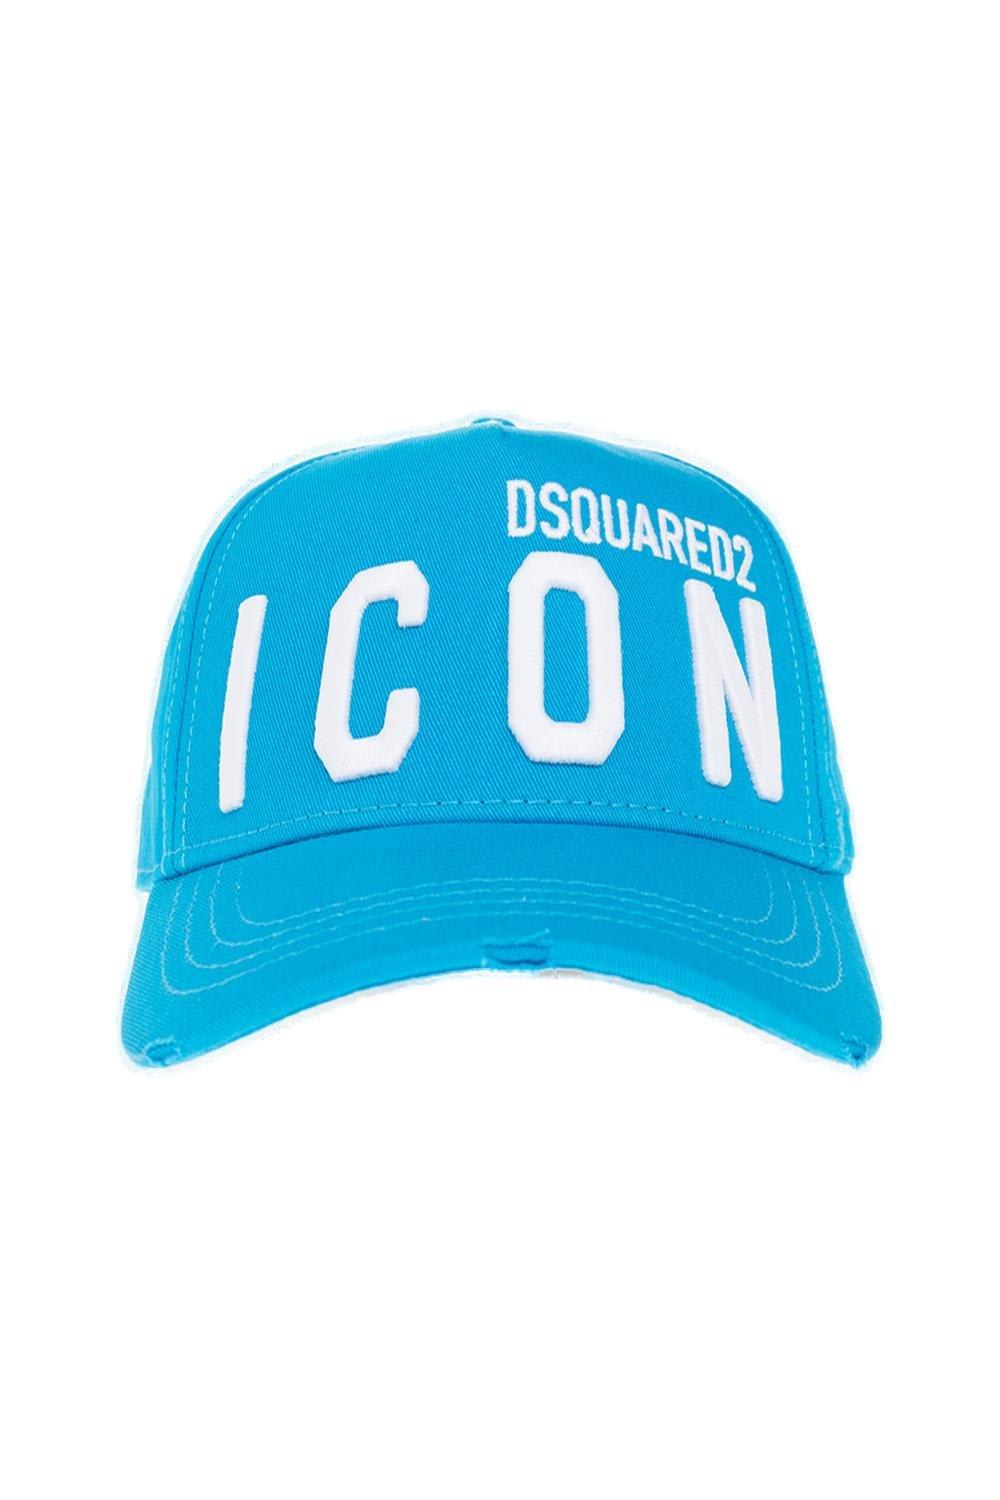 DSQUARED2 ICON LOGO EMBROIDERED DISTRESSED BASEBALL CAP